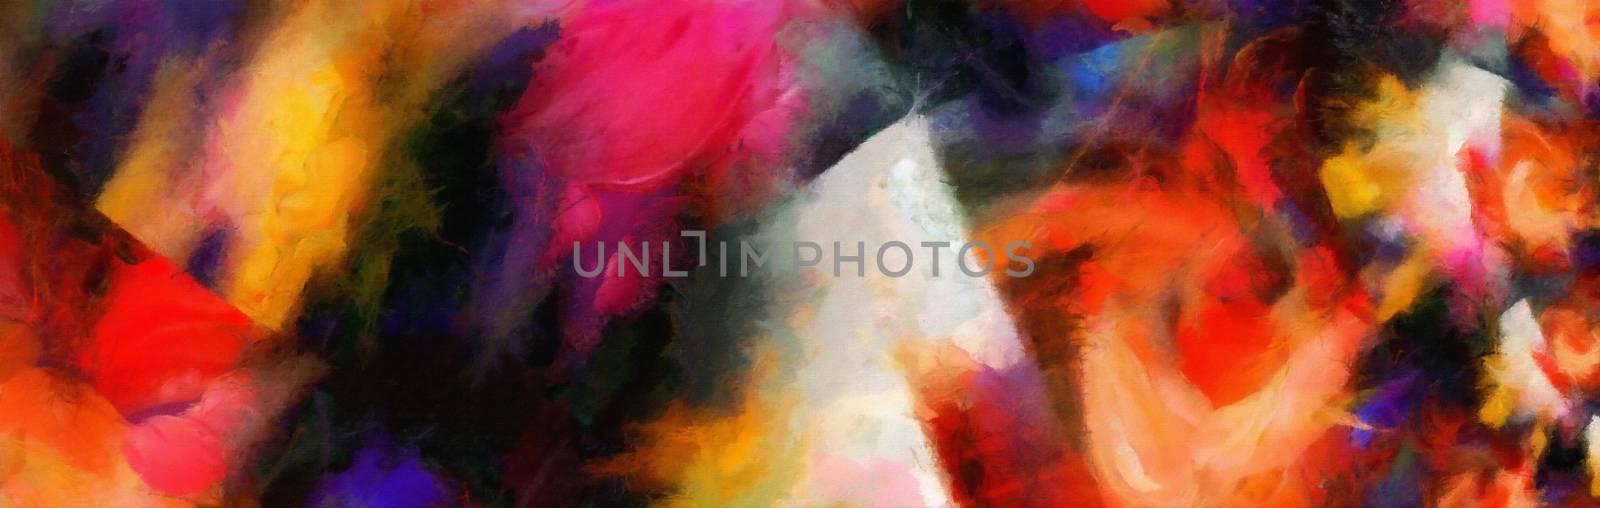 Colorful abstract painting. Vivid colors by applesstock